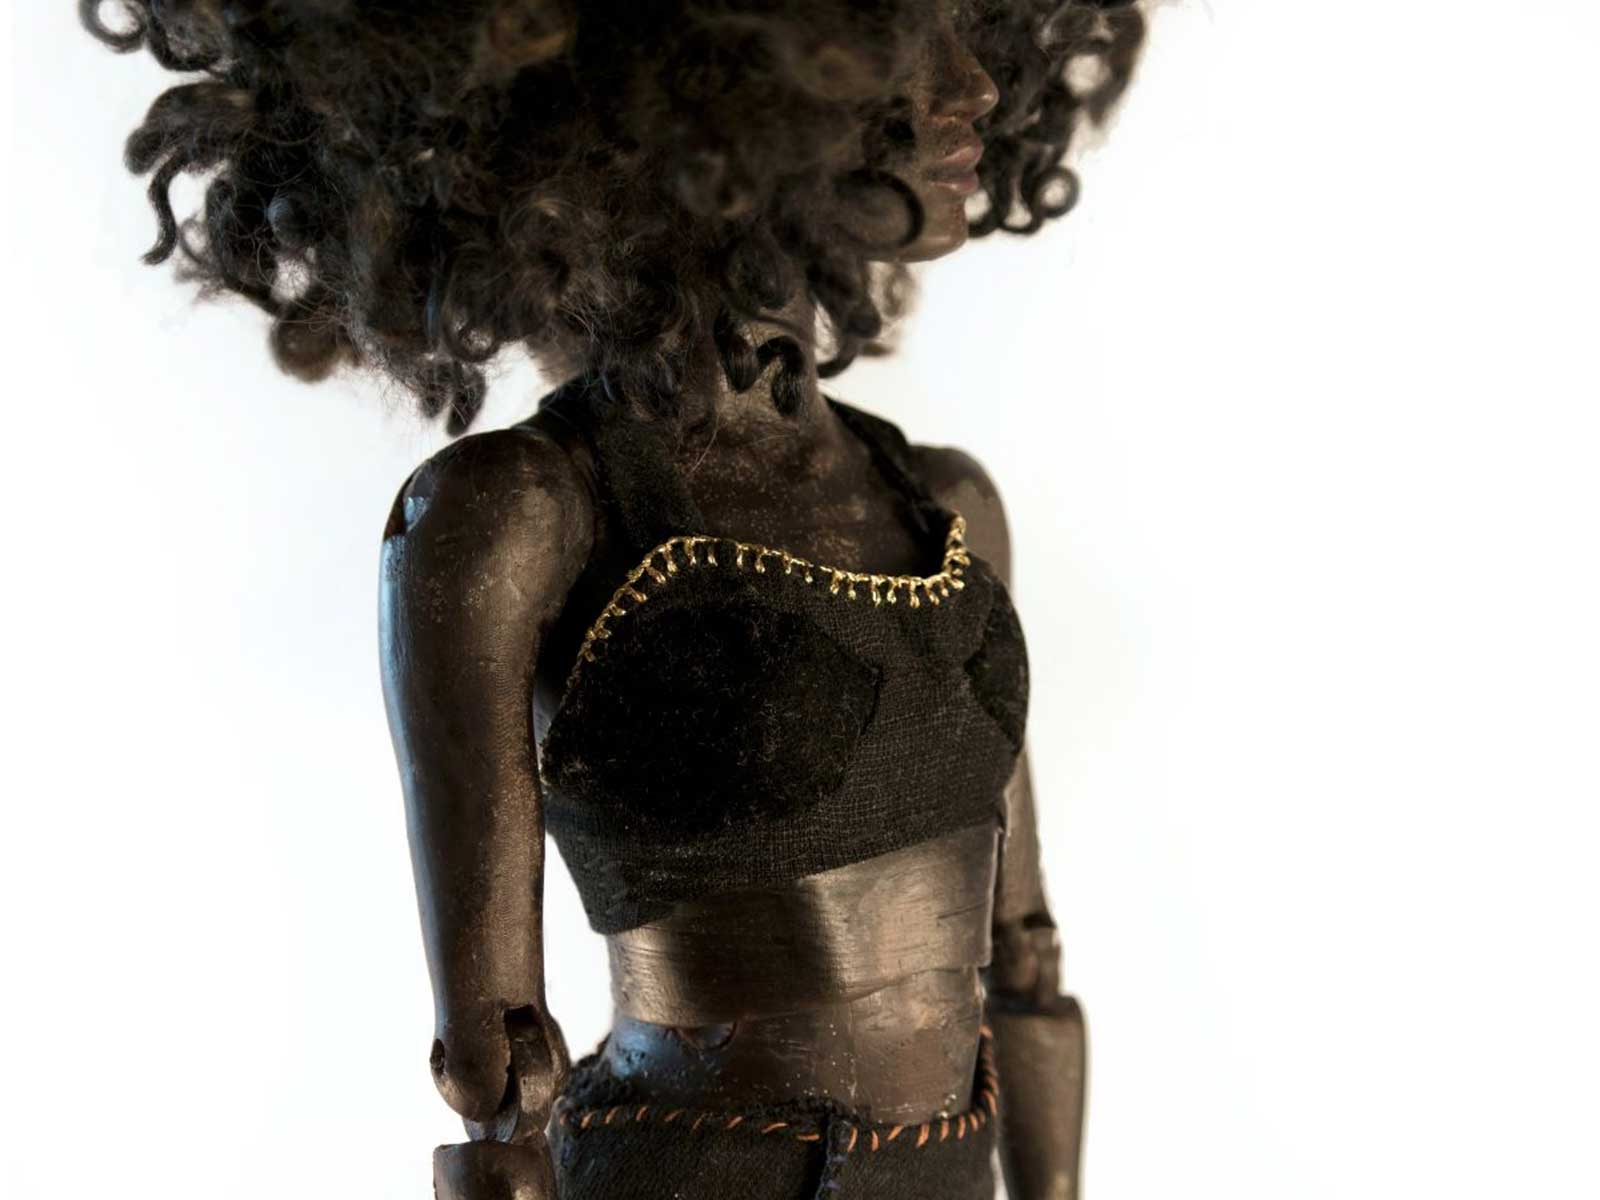 A female doll with voluminous curly hair wearing a gold trimmed halter top.